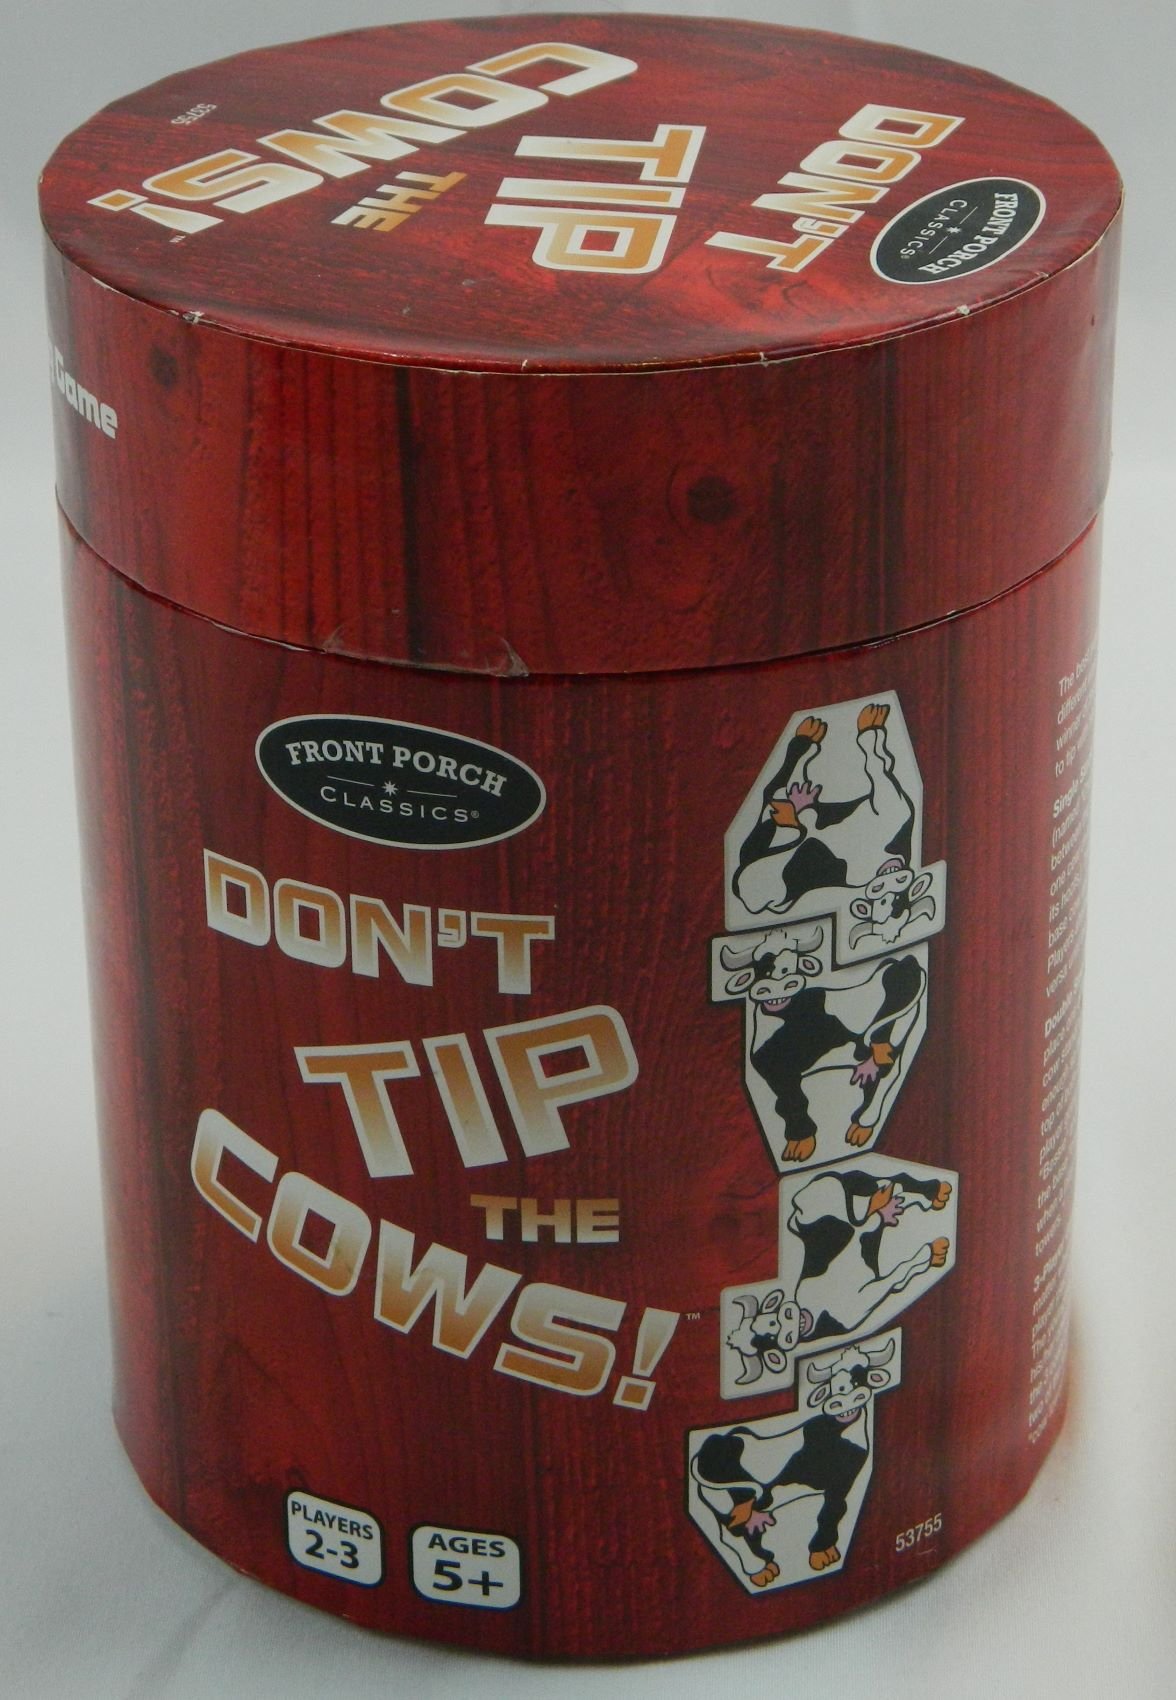 Box for Don't Tip the Cows